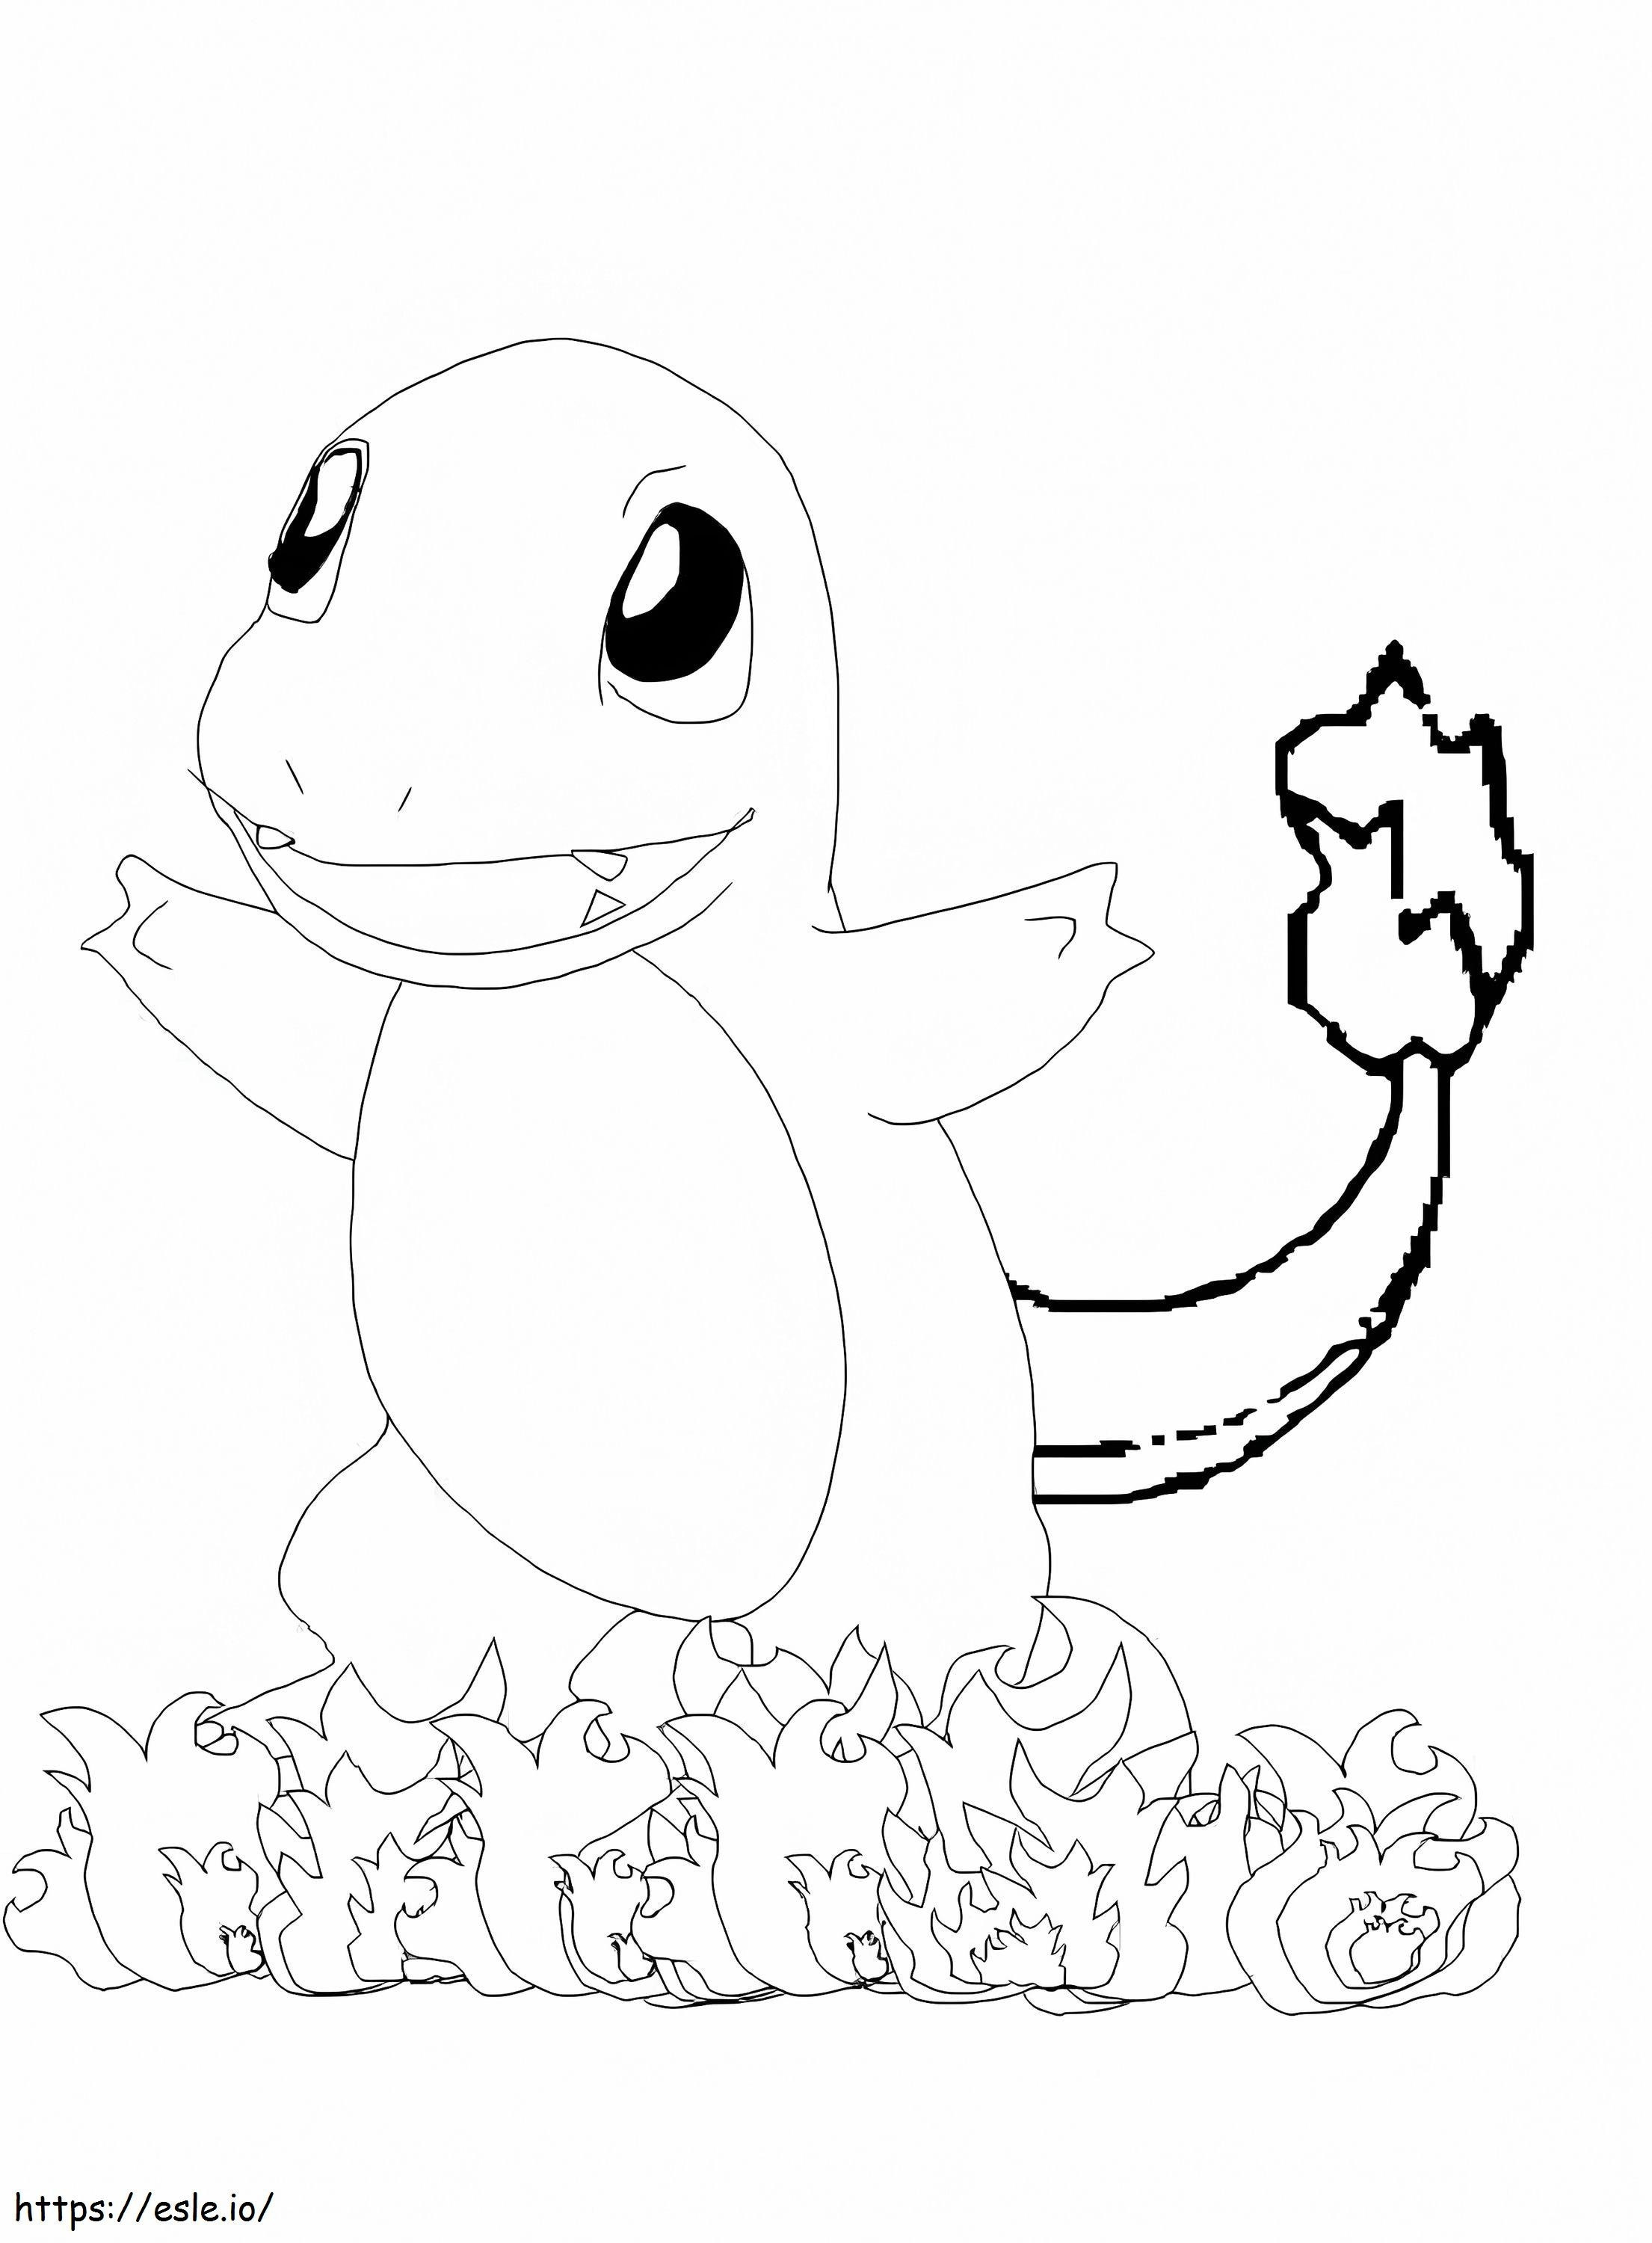 Fire Charmer coloring page